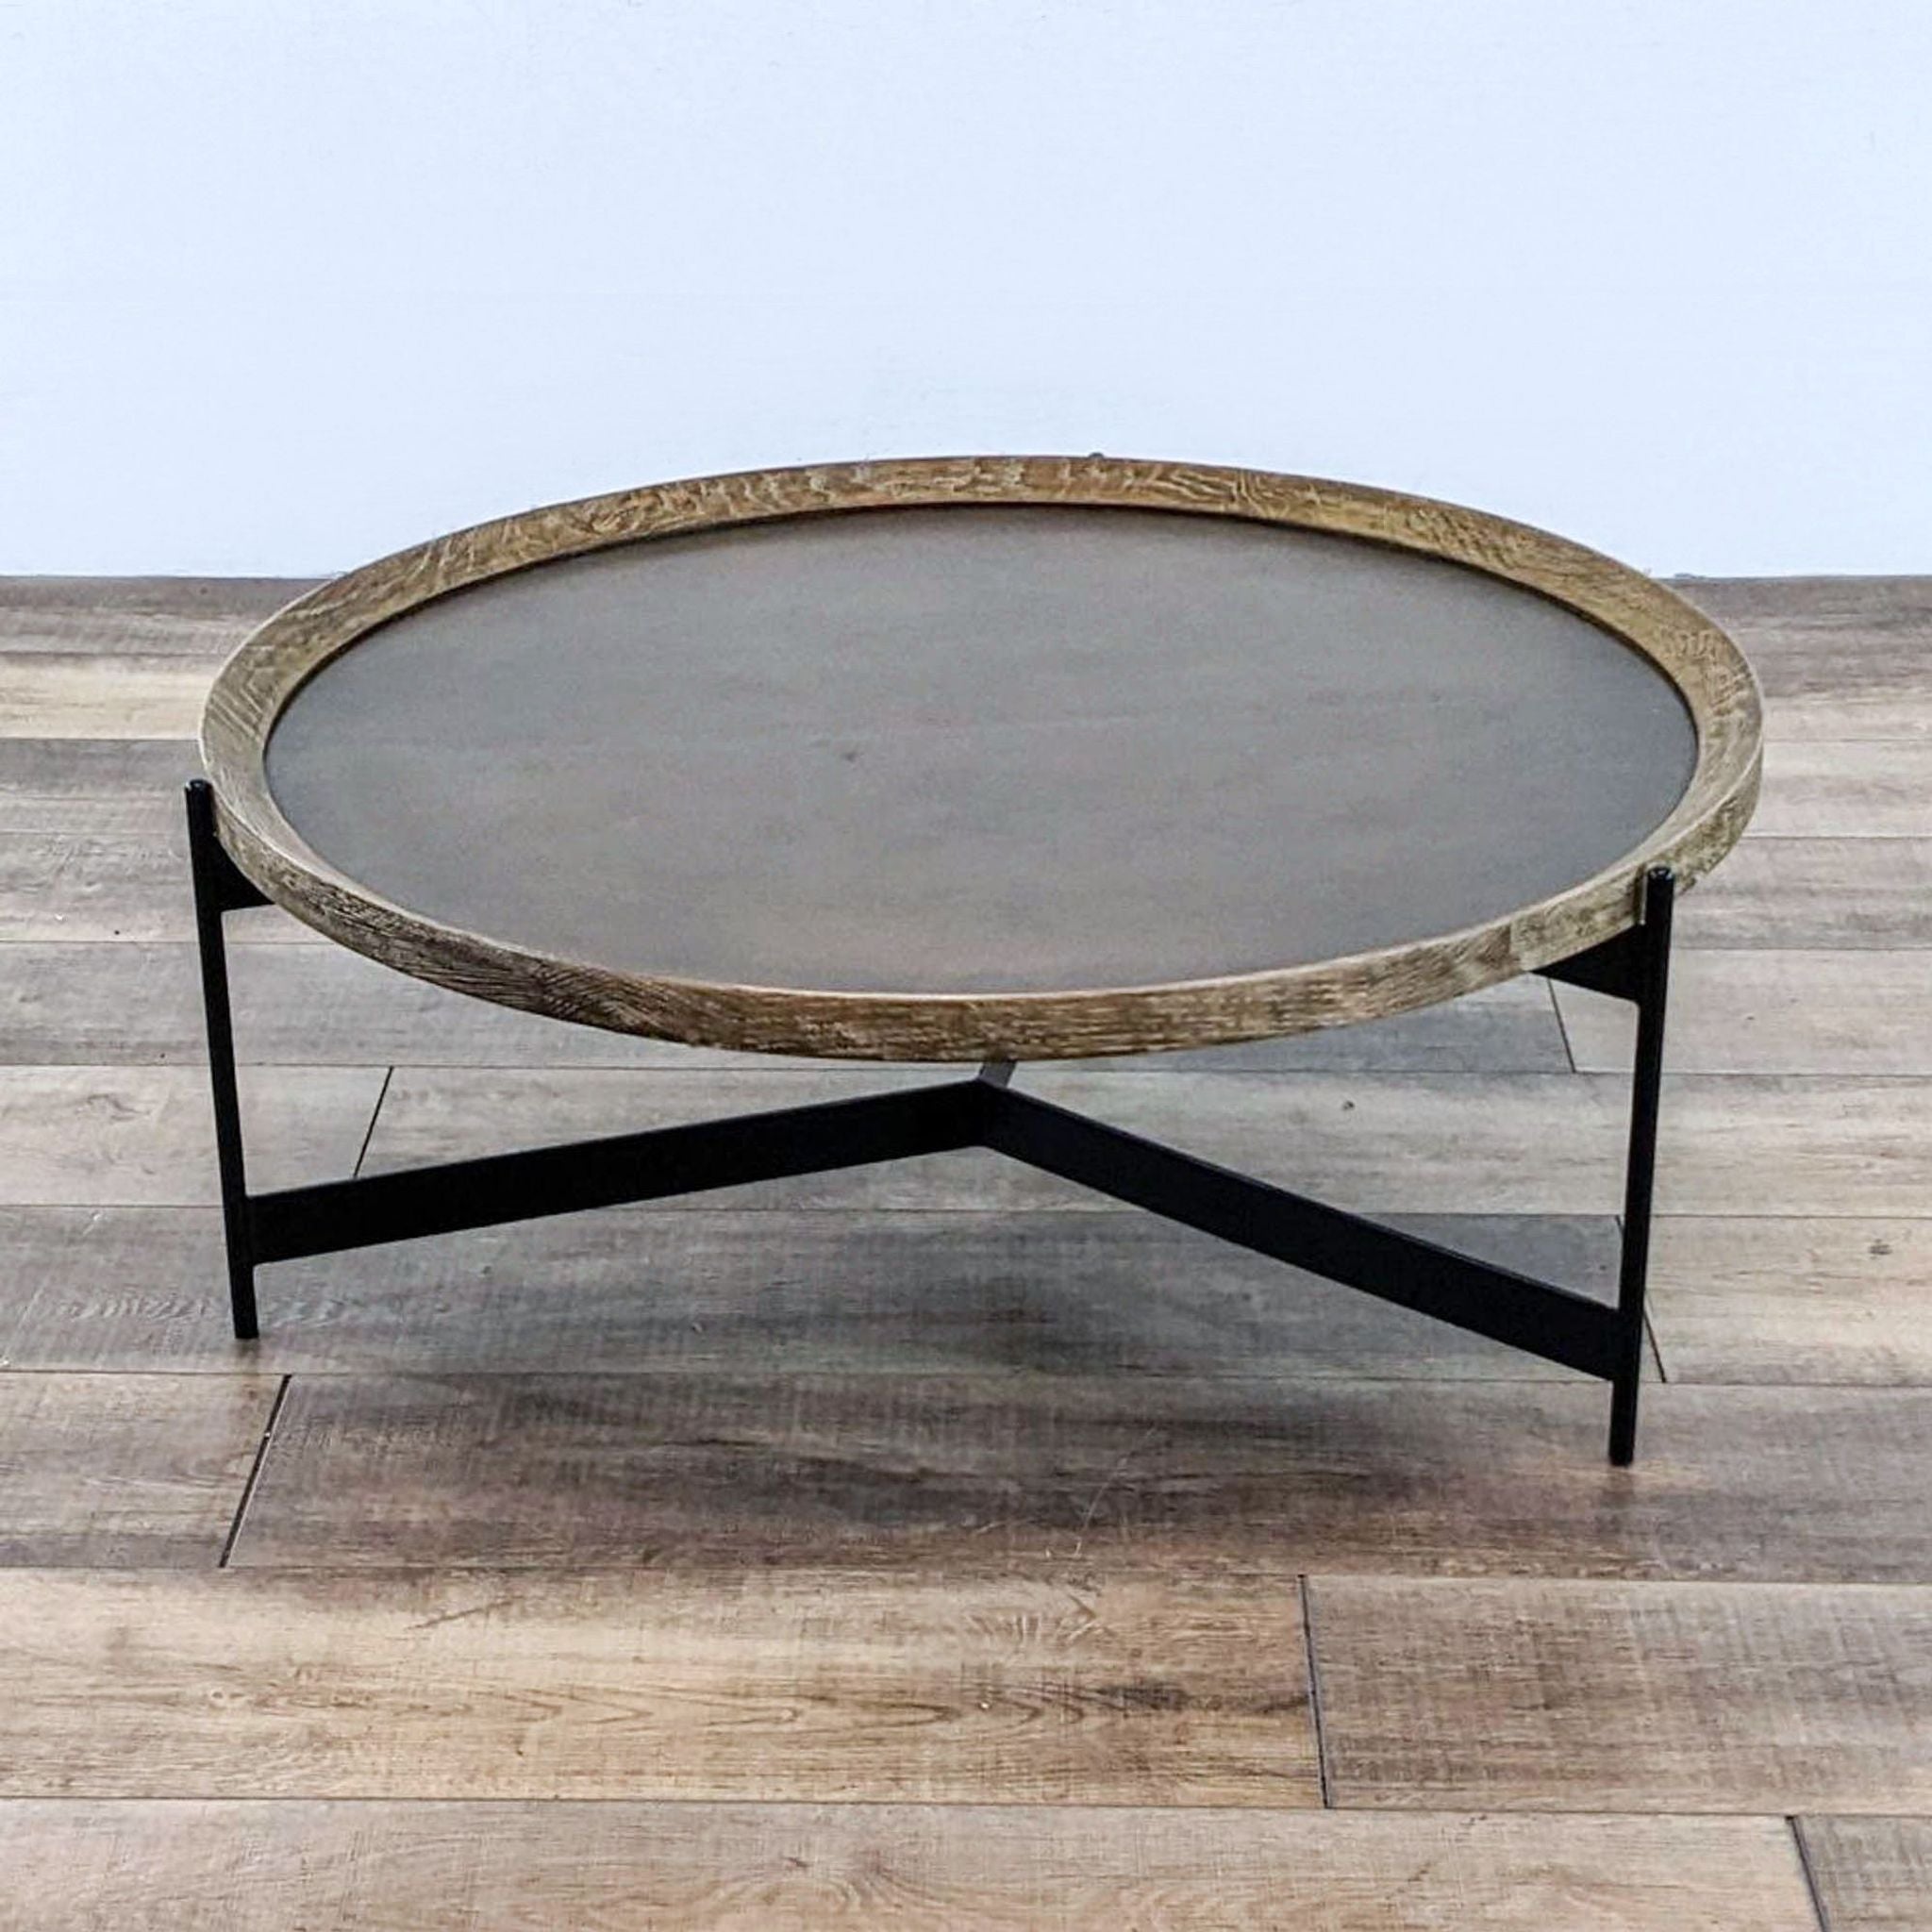 Round Pottery Barn coffee table with textured edge and black angular legs on a wood floor.